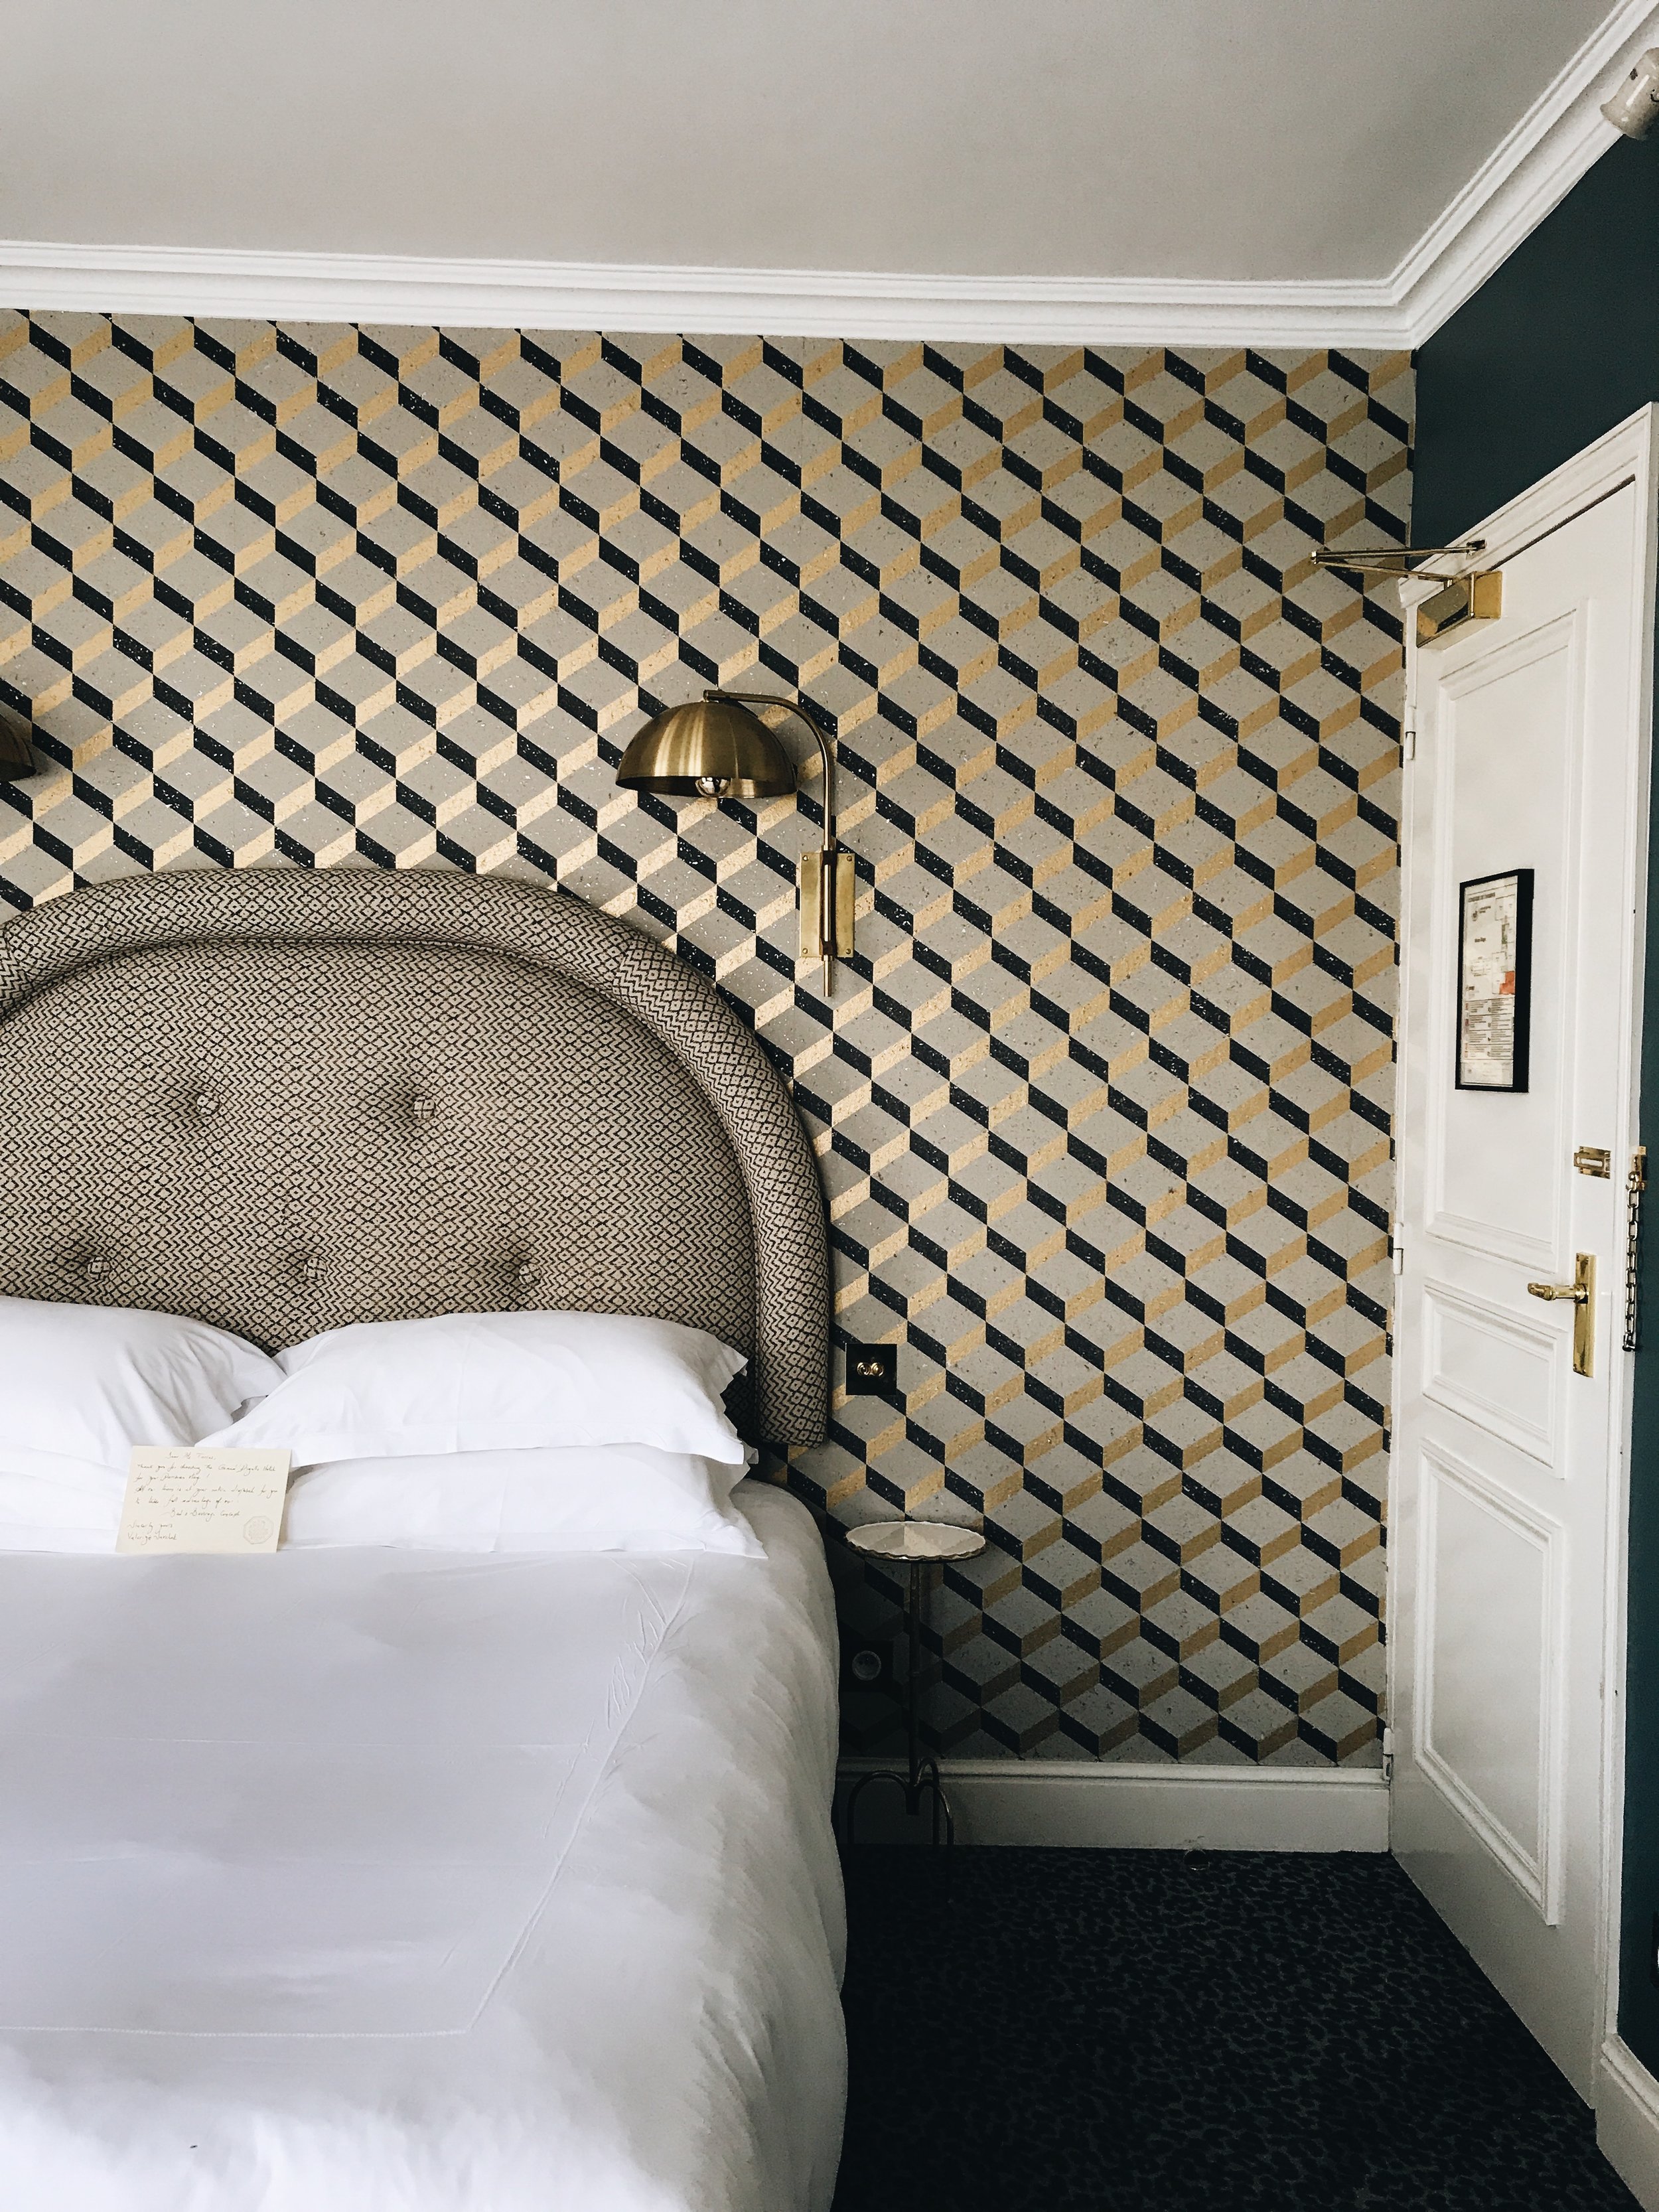 Grand Pigalle Hotel Room